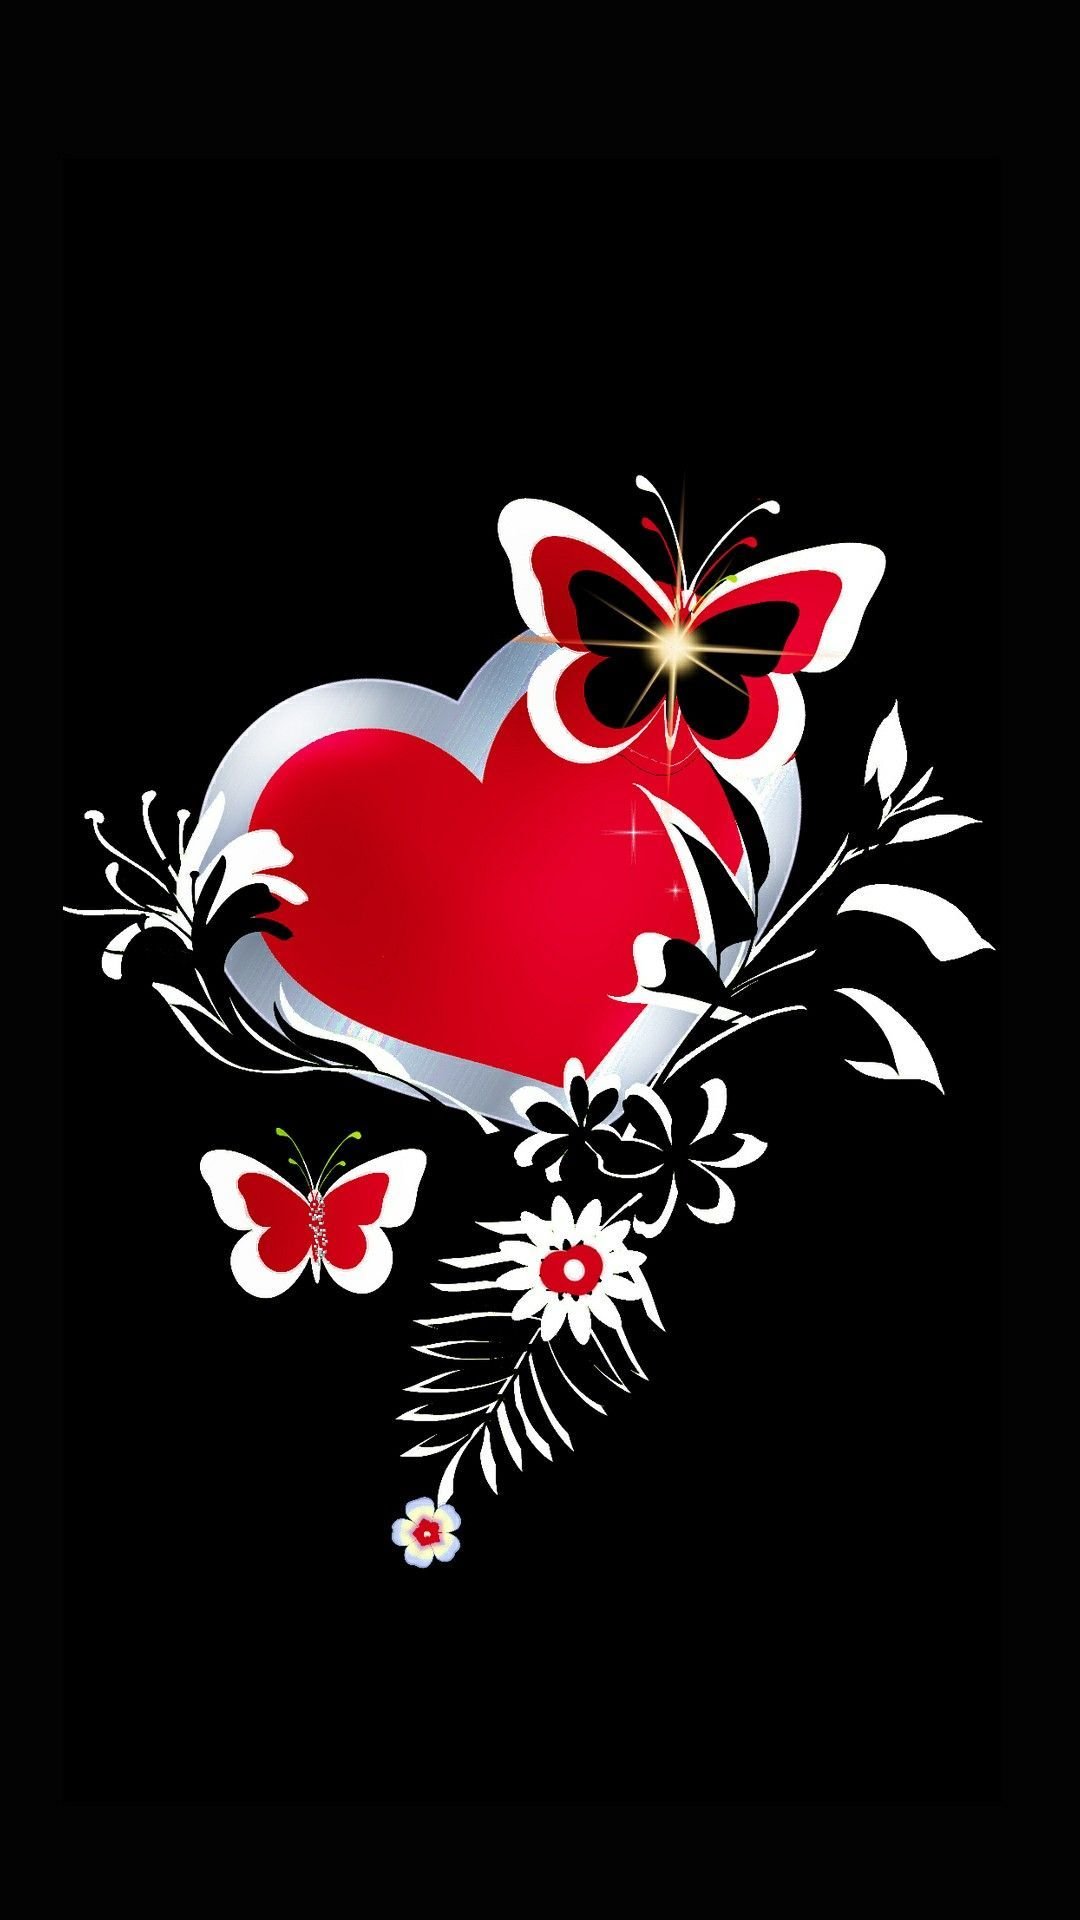 Share 63+ black background red heart wallpaper - in.cdgdbentre